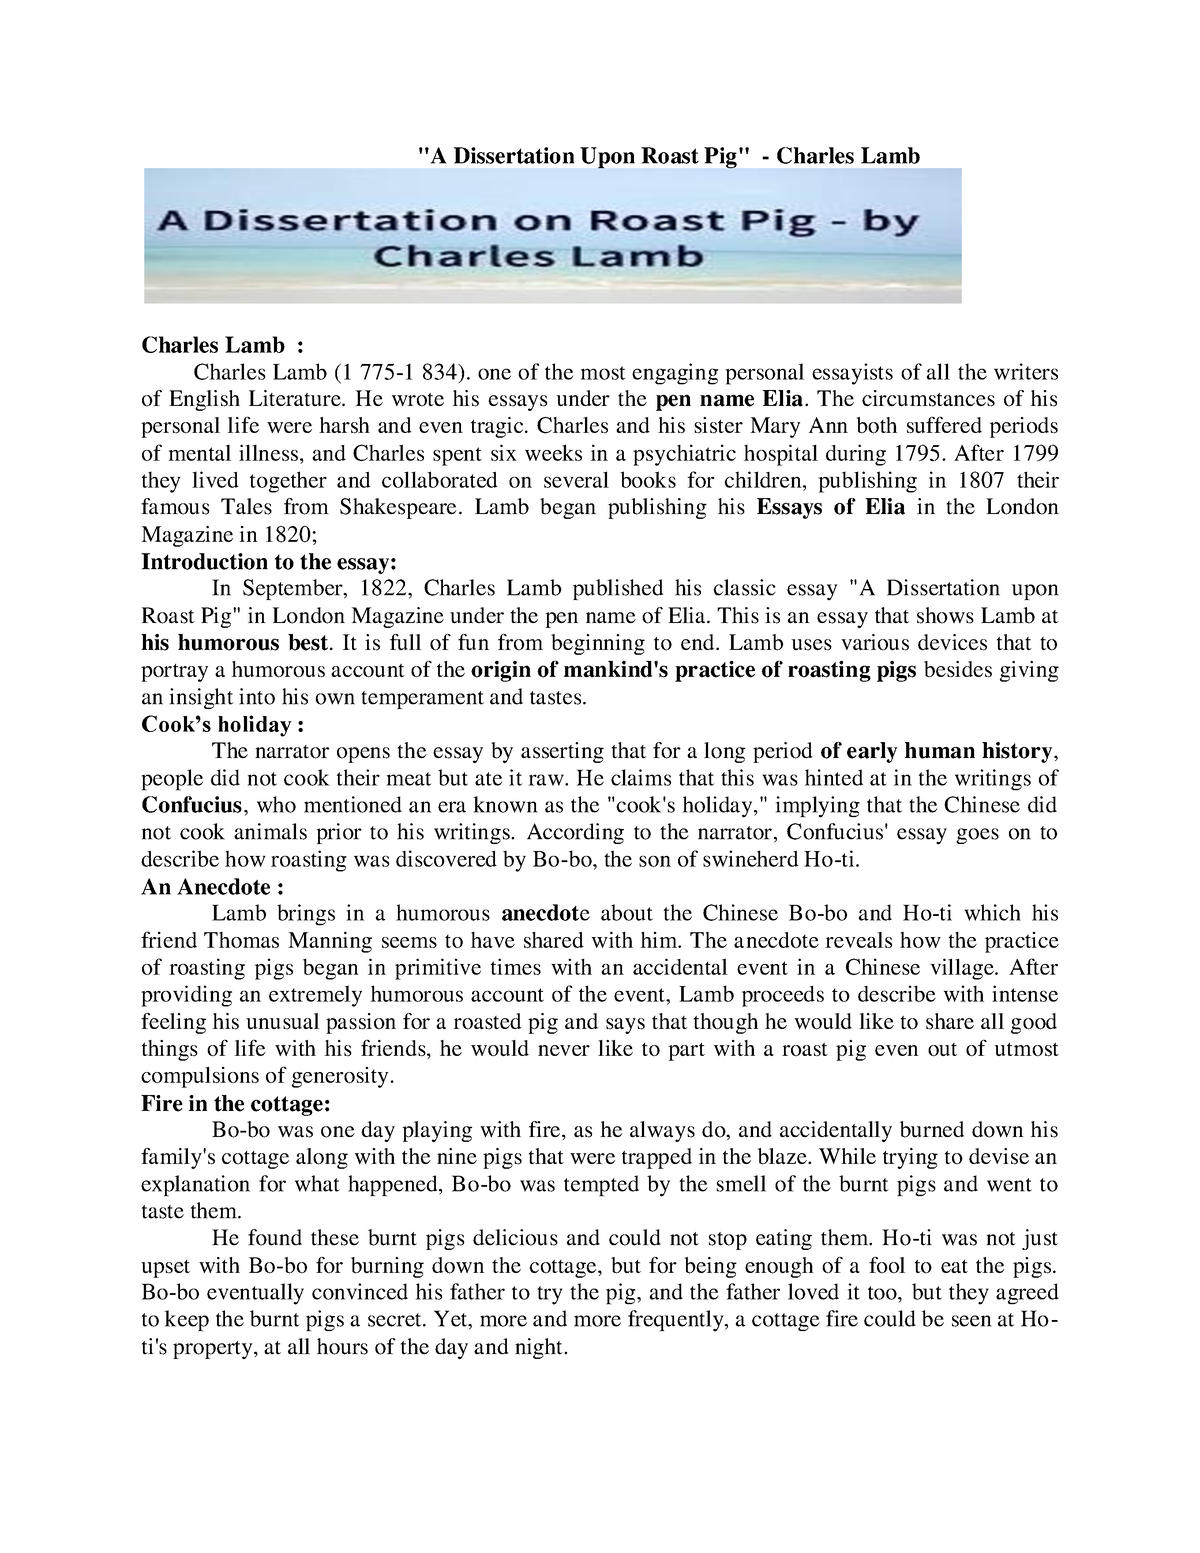 who wrote a dissertation upon roast pig